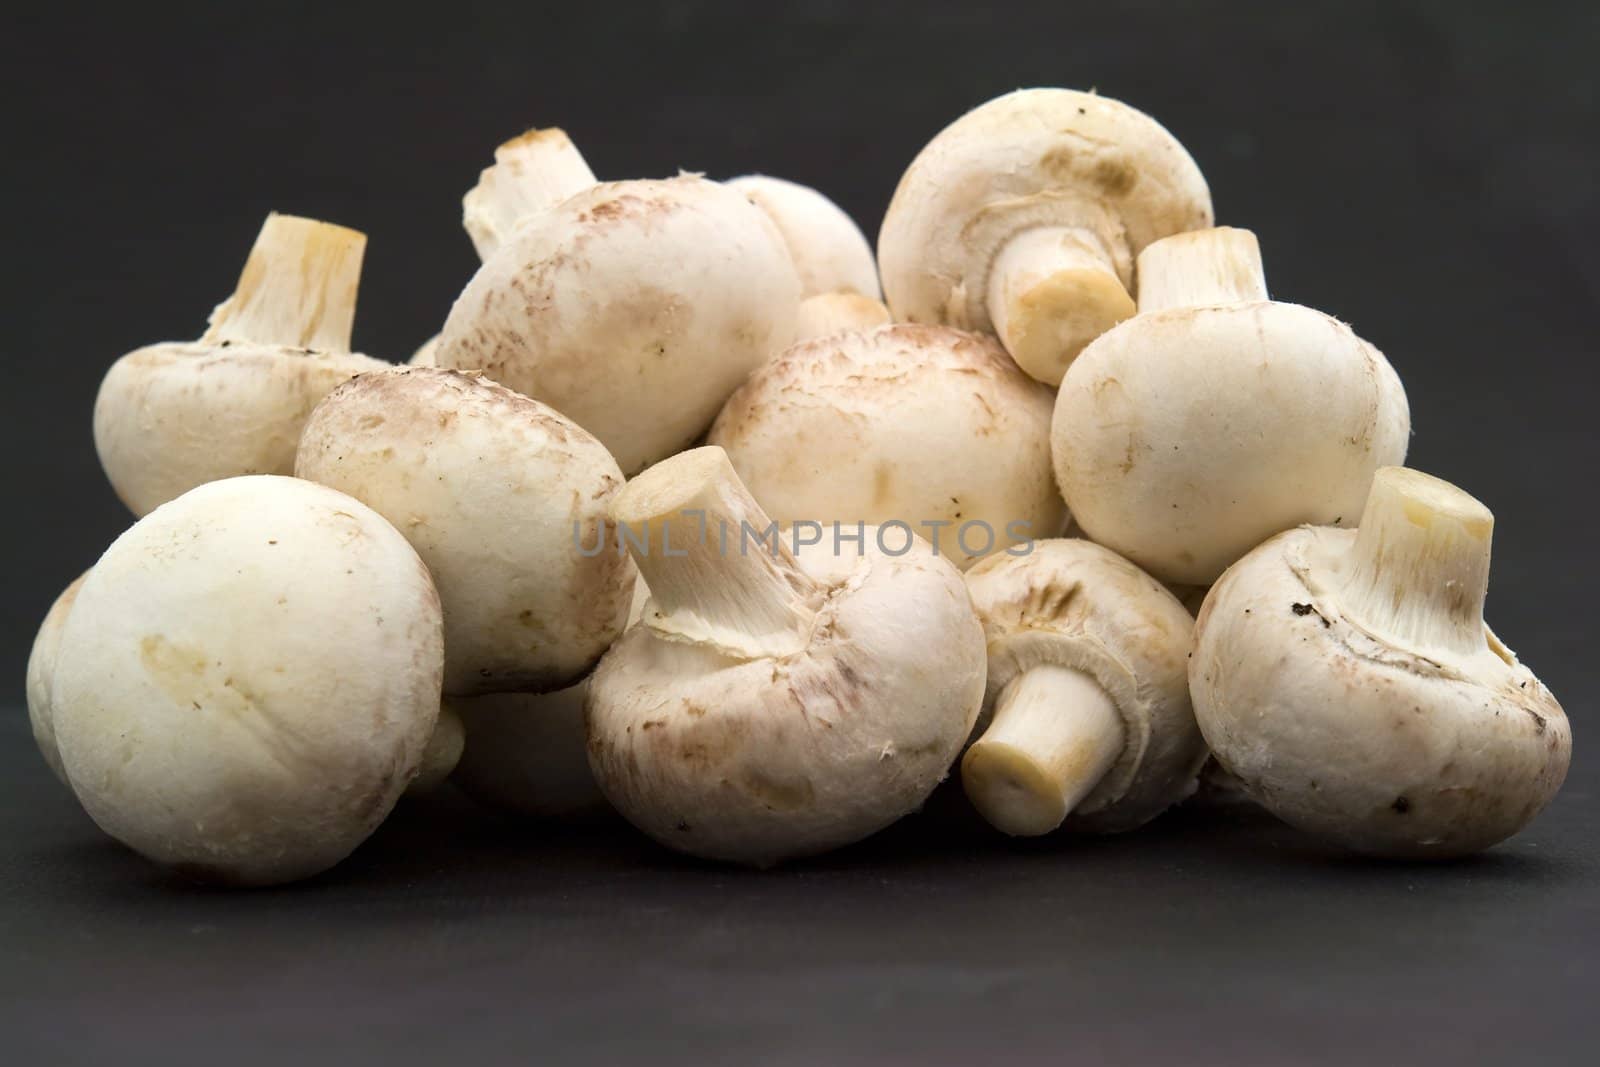 Mushrooms. Heap of champignons on a black background